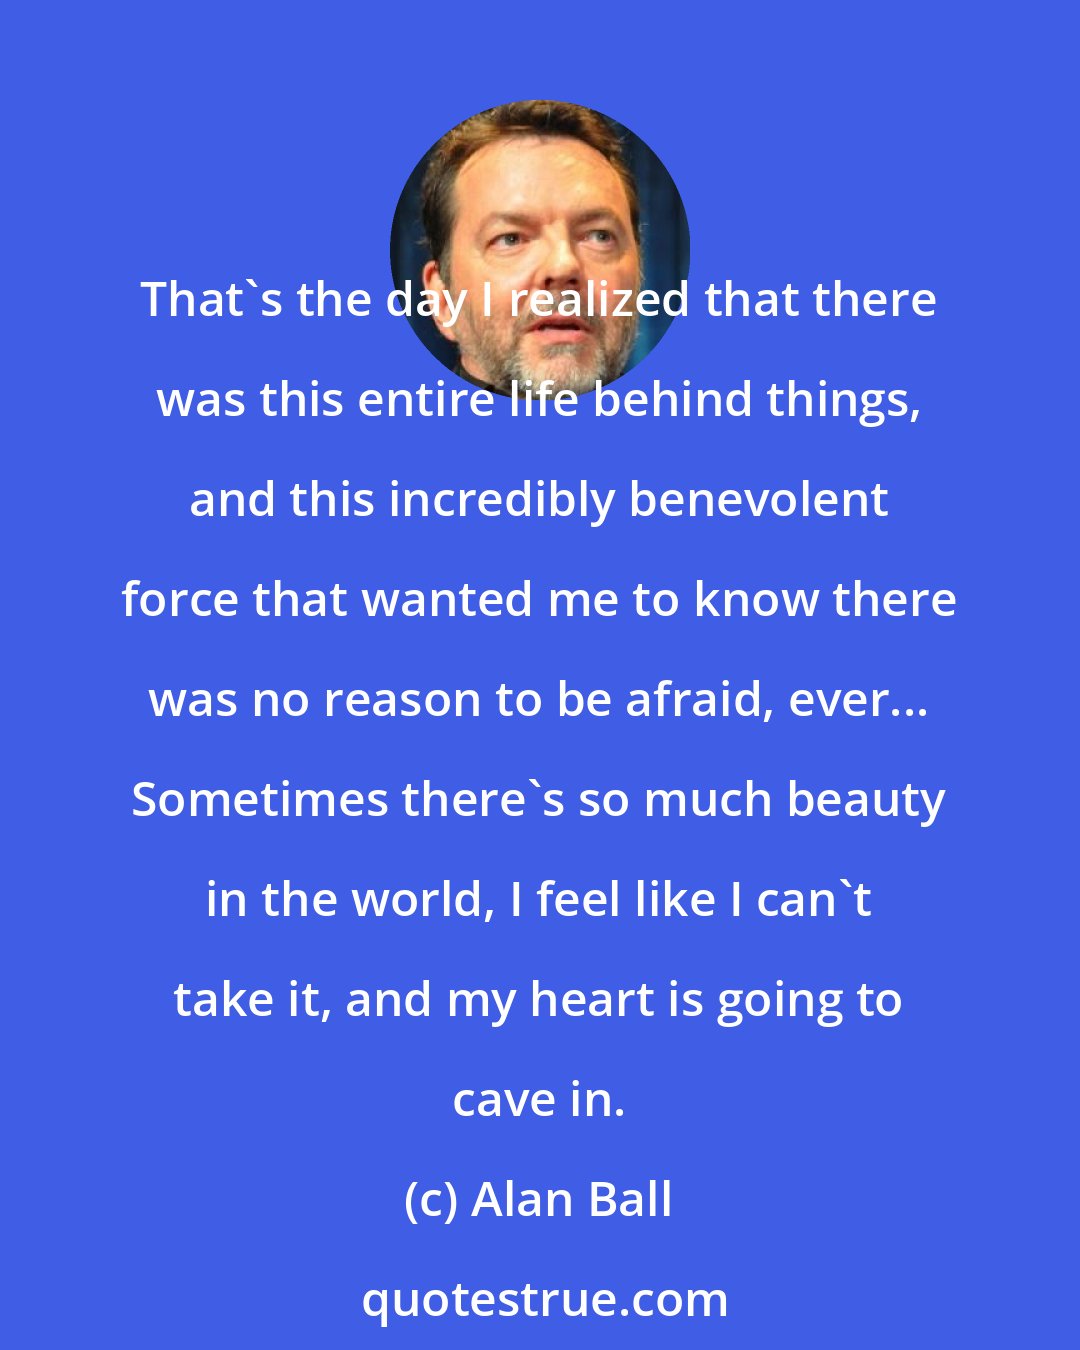 Alan Ball: That's the day I realized that there was this entire life behind things, and this incredibly benevolent force that wanted me to know there was no reason to be afraid, ever... Sometimes there's so much beauty in the world, I feel like I can't take it, and my heart is going to cave in.